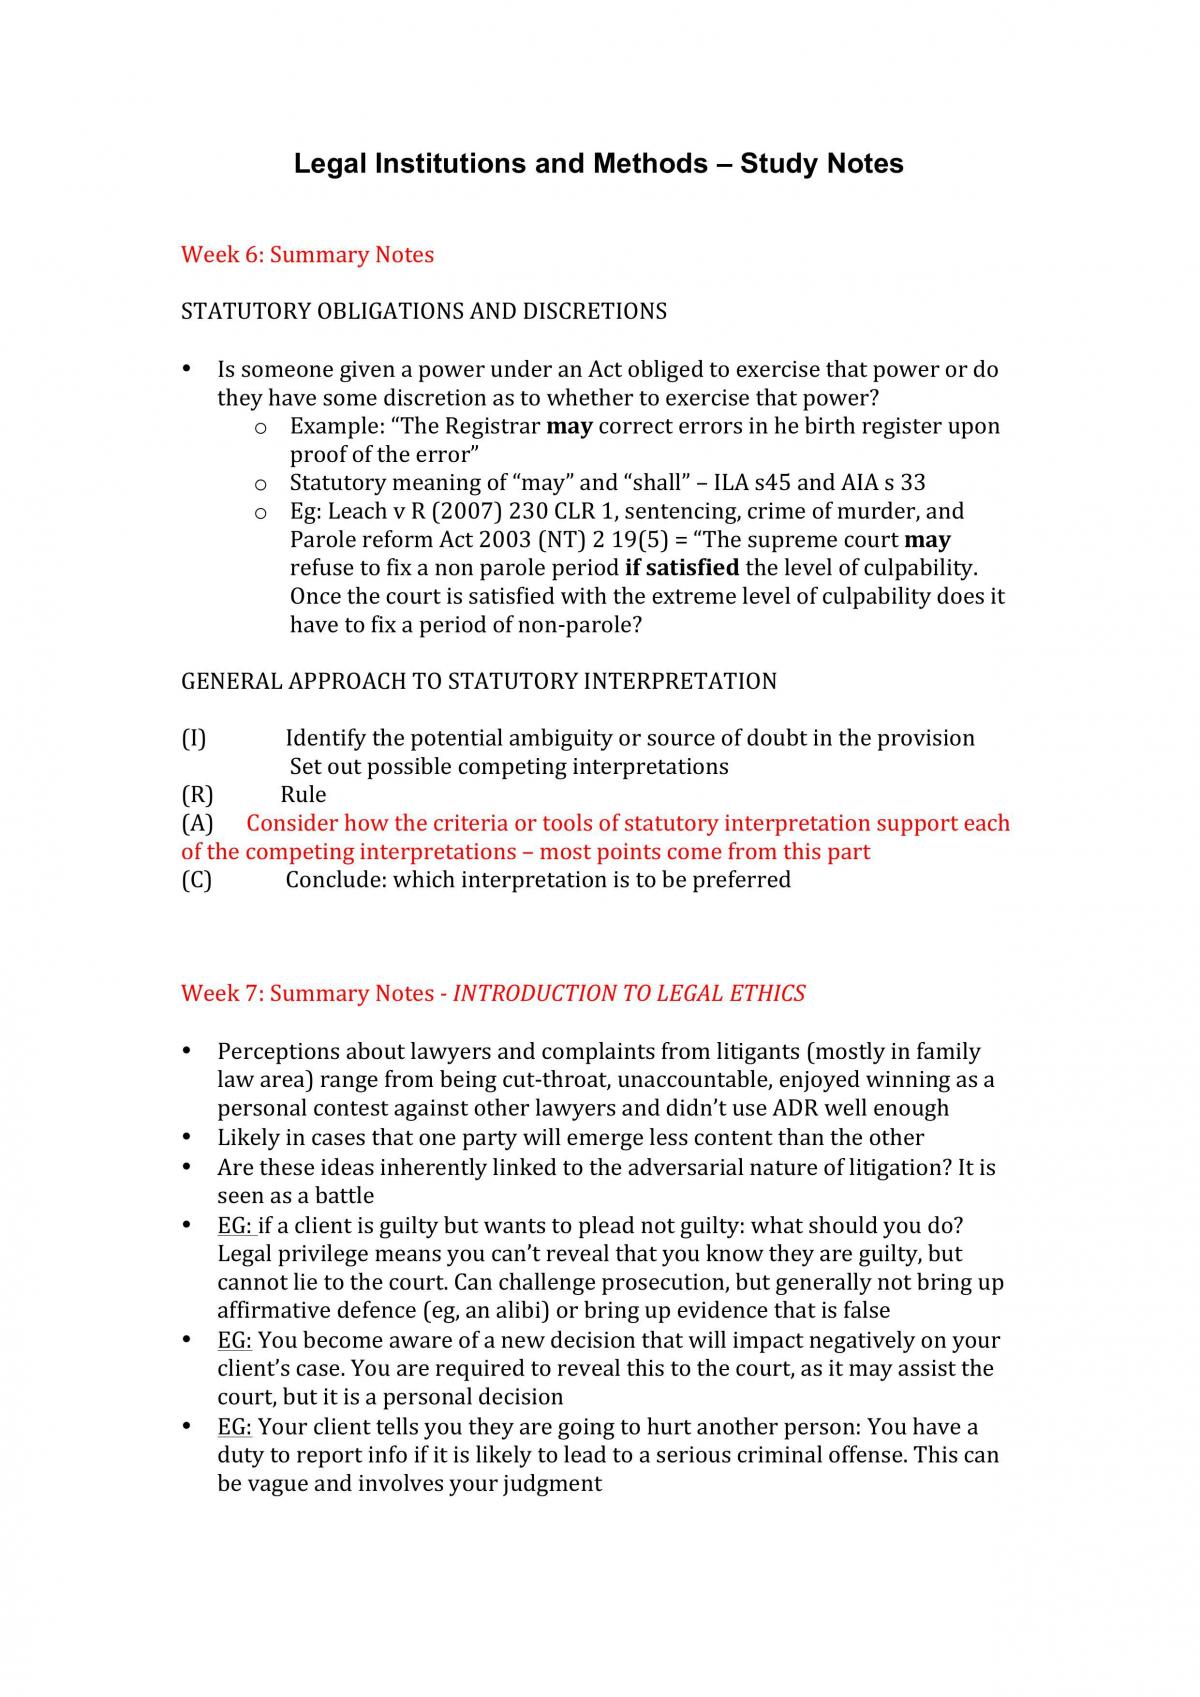 LIM Summary Notes - Page 1